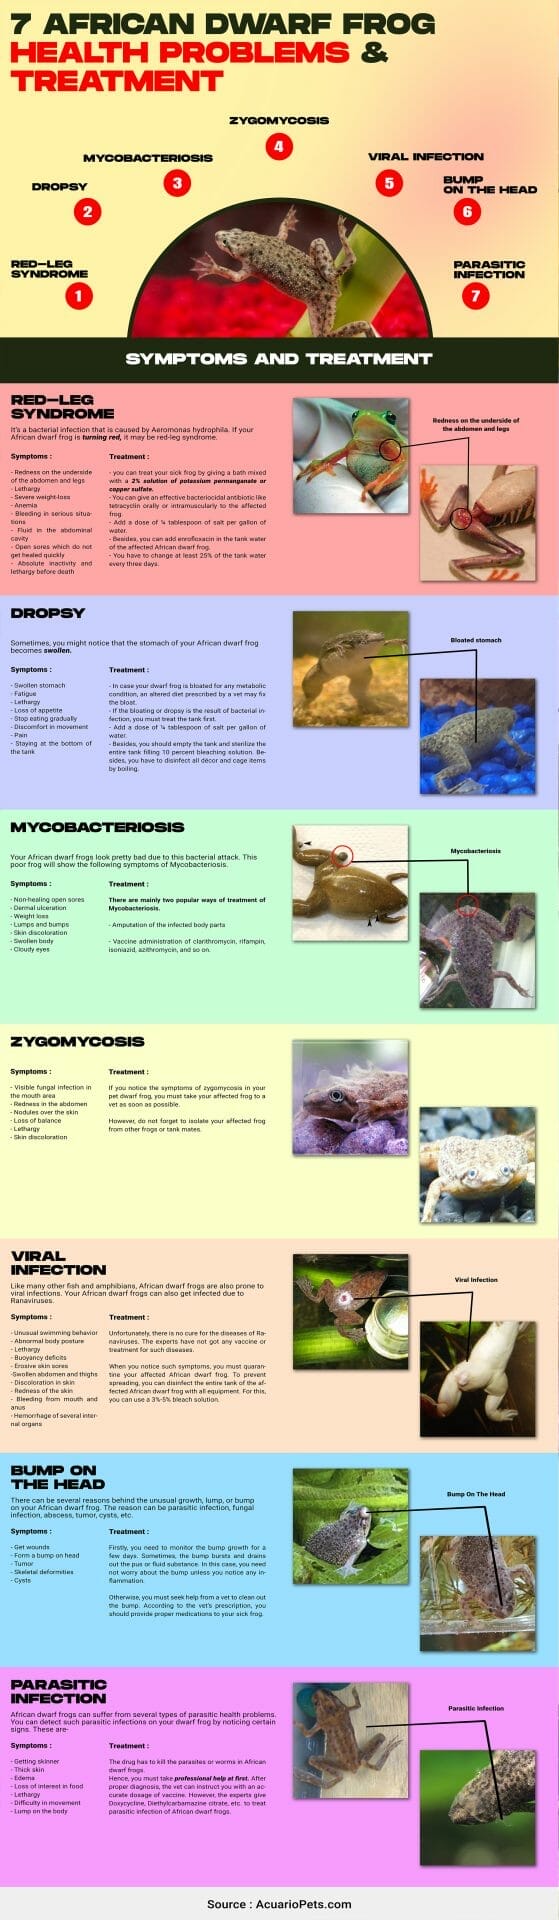 african dwarf frog health problems and treatment infographic including red leg syndrome, dropsy, mycobacteriosis, zygomycosis, viral infection, bump on the head, parasitic infection